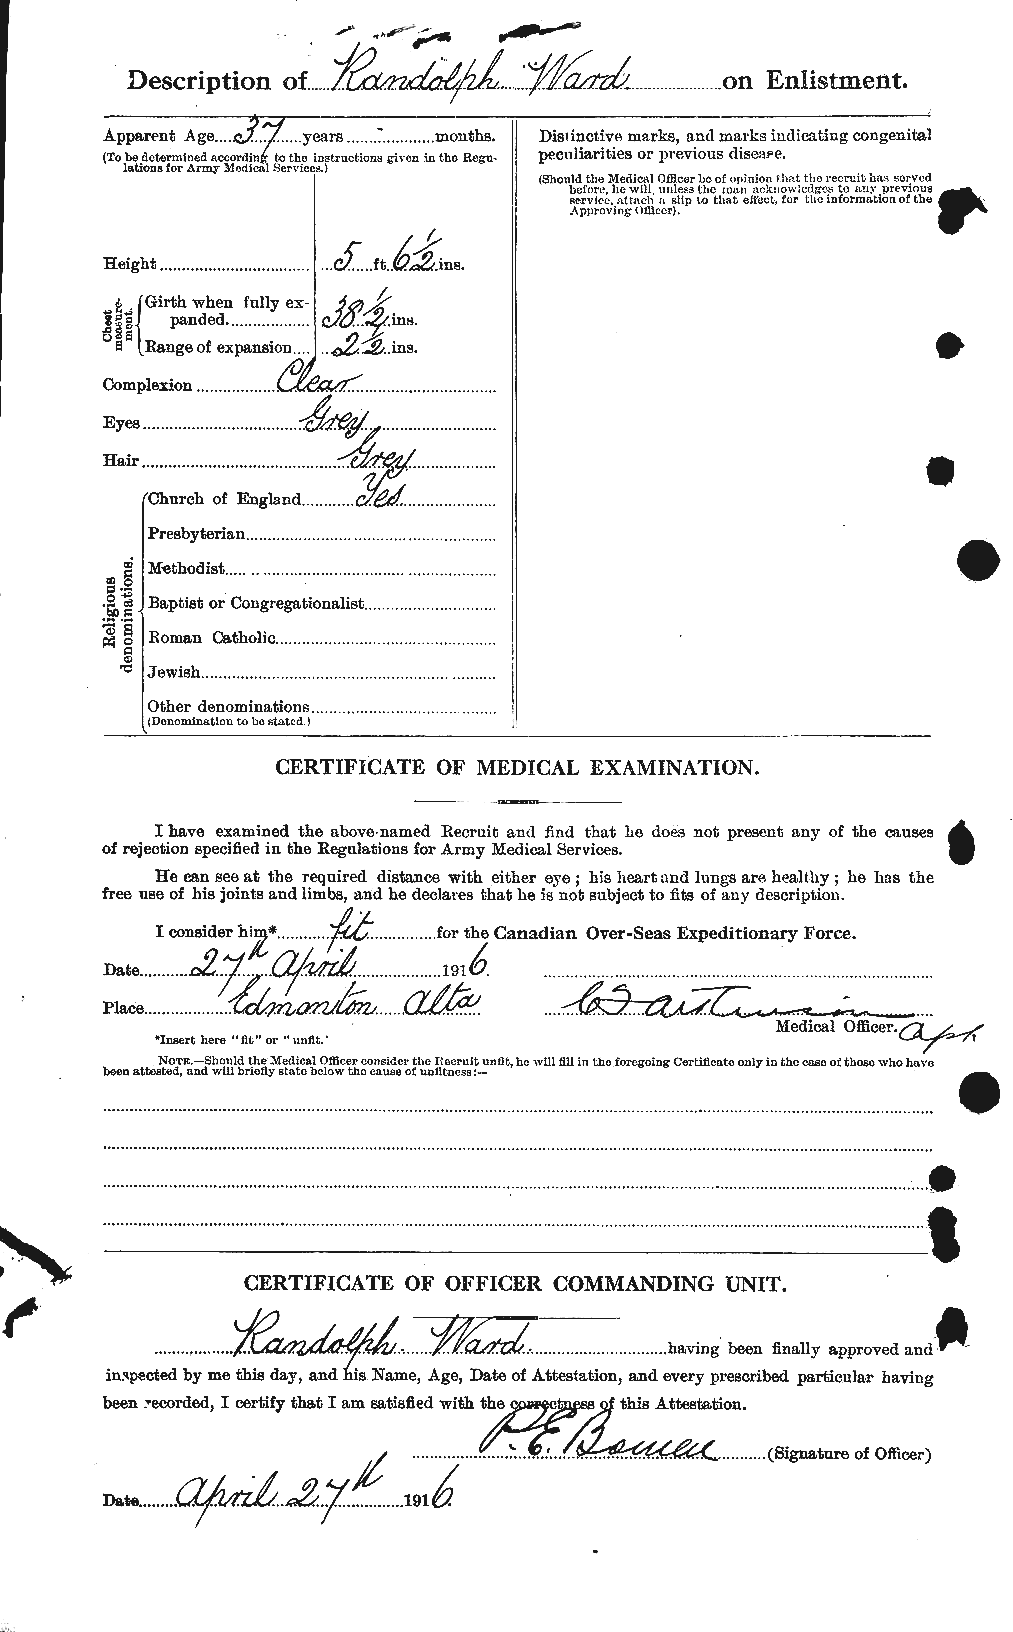 Personnel Records of the First World War - CEF 659636b